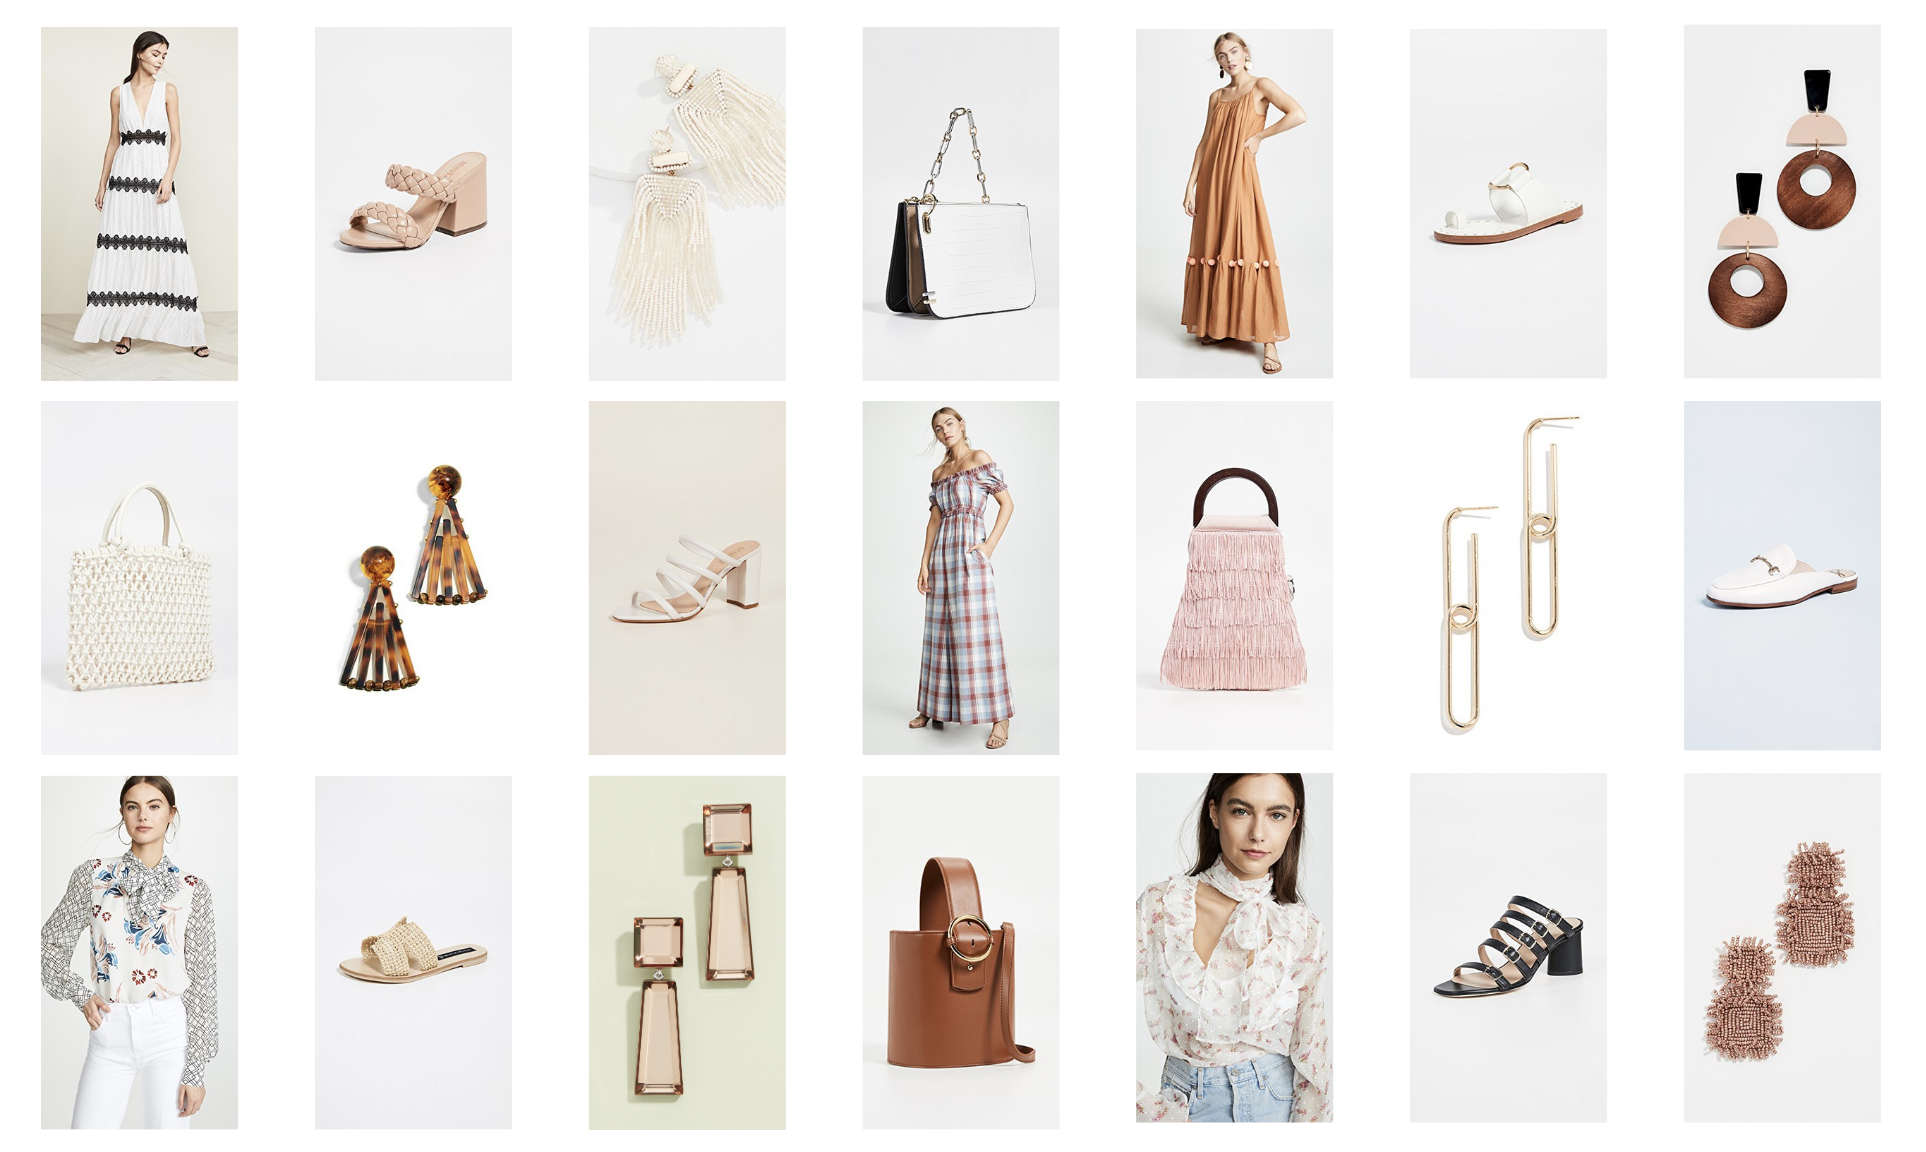 Shopbop Sale Pics for Spring